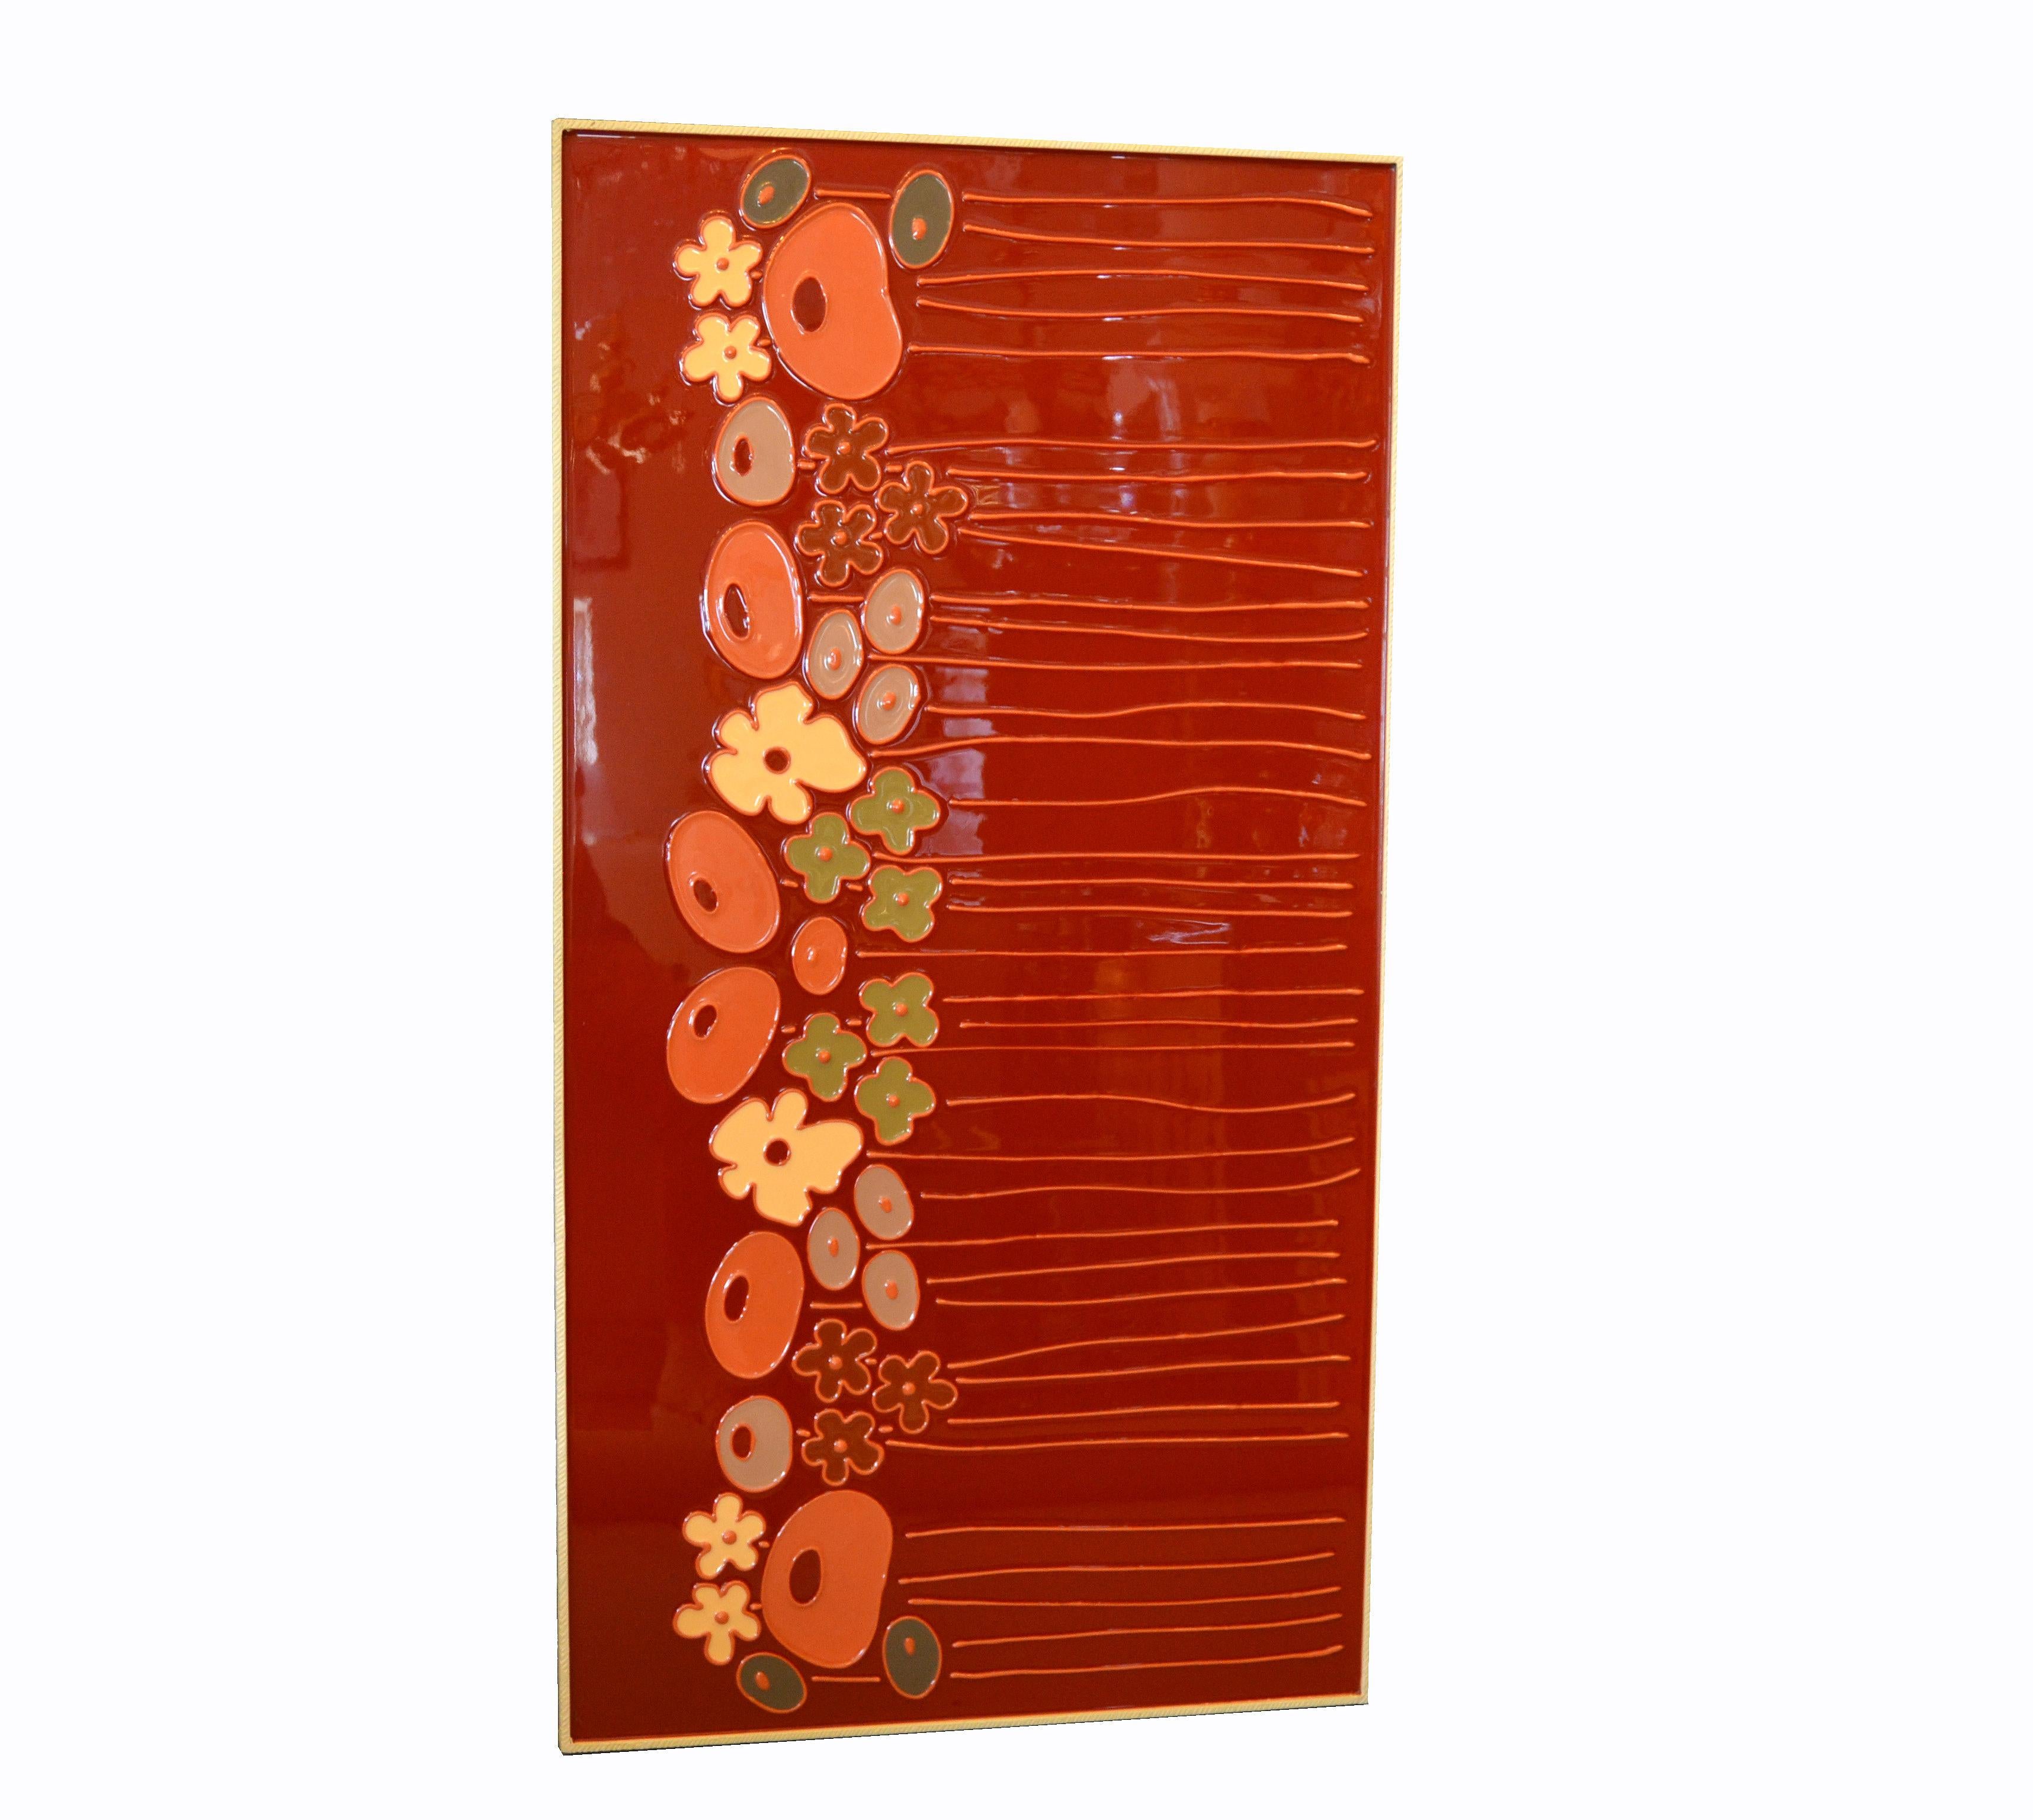 Incredible artistic brown and beige enamel sculpted flowers that can be wall mounted.
It is framed and can be hung in landscape format as well as horizontal format.